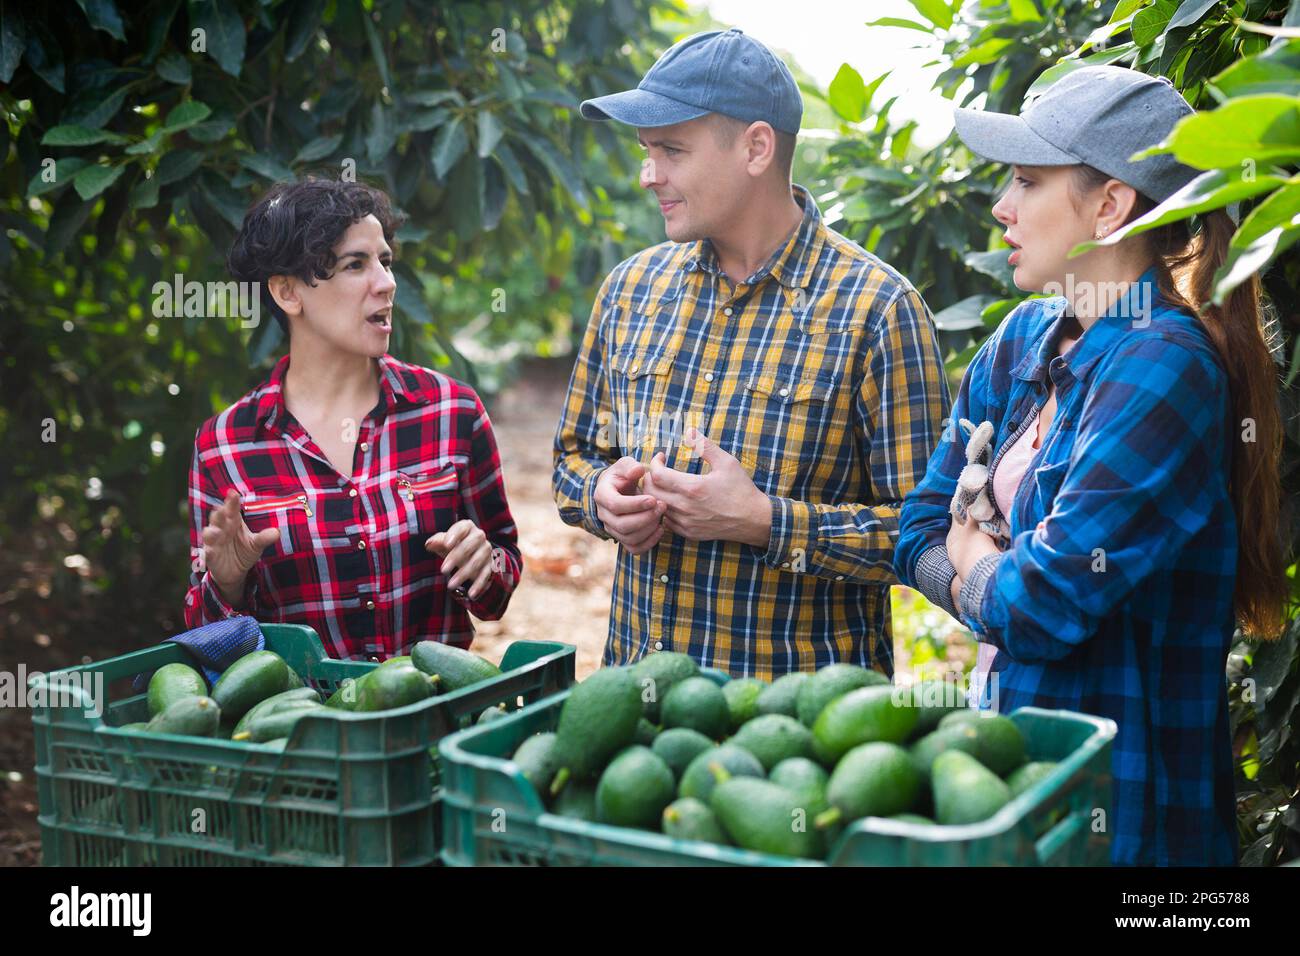 Group of multinational farmers gathering together gresh organic avocados on farm Stock Photo